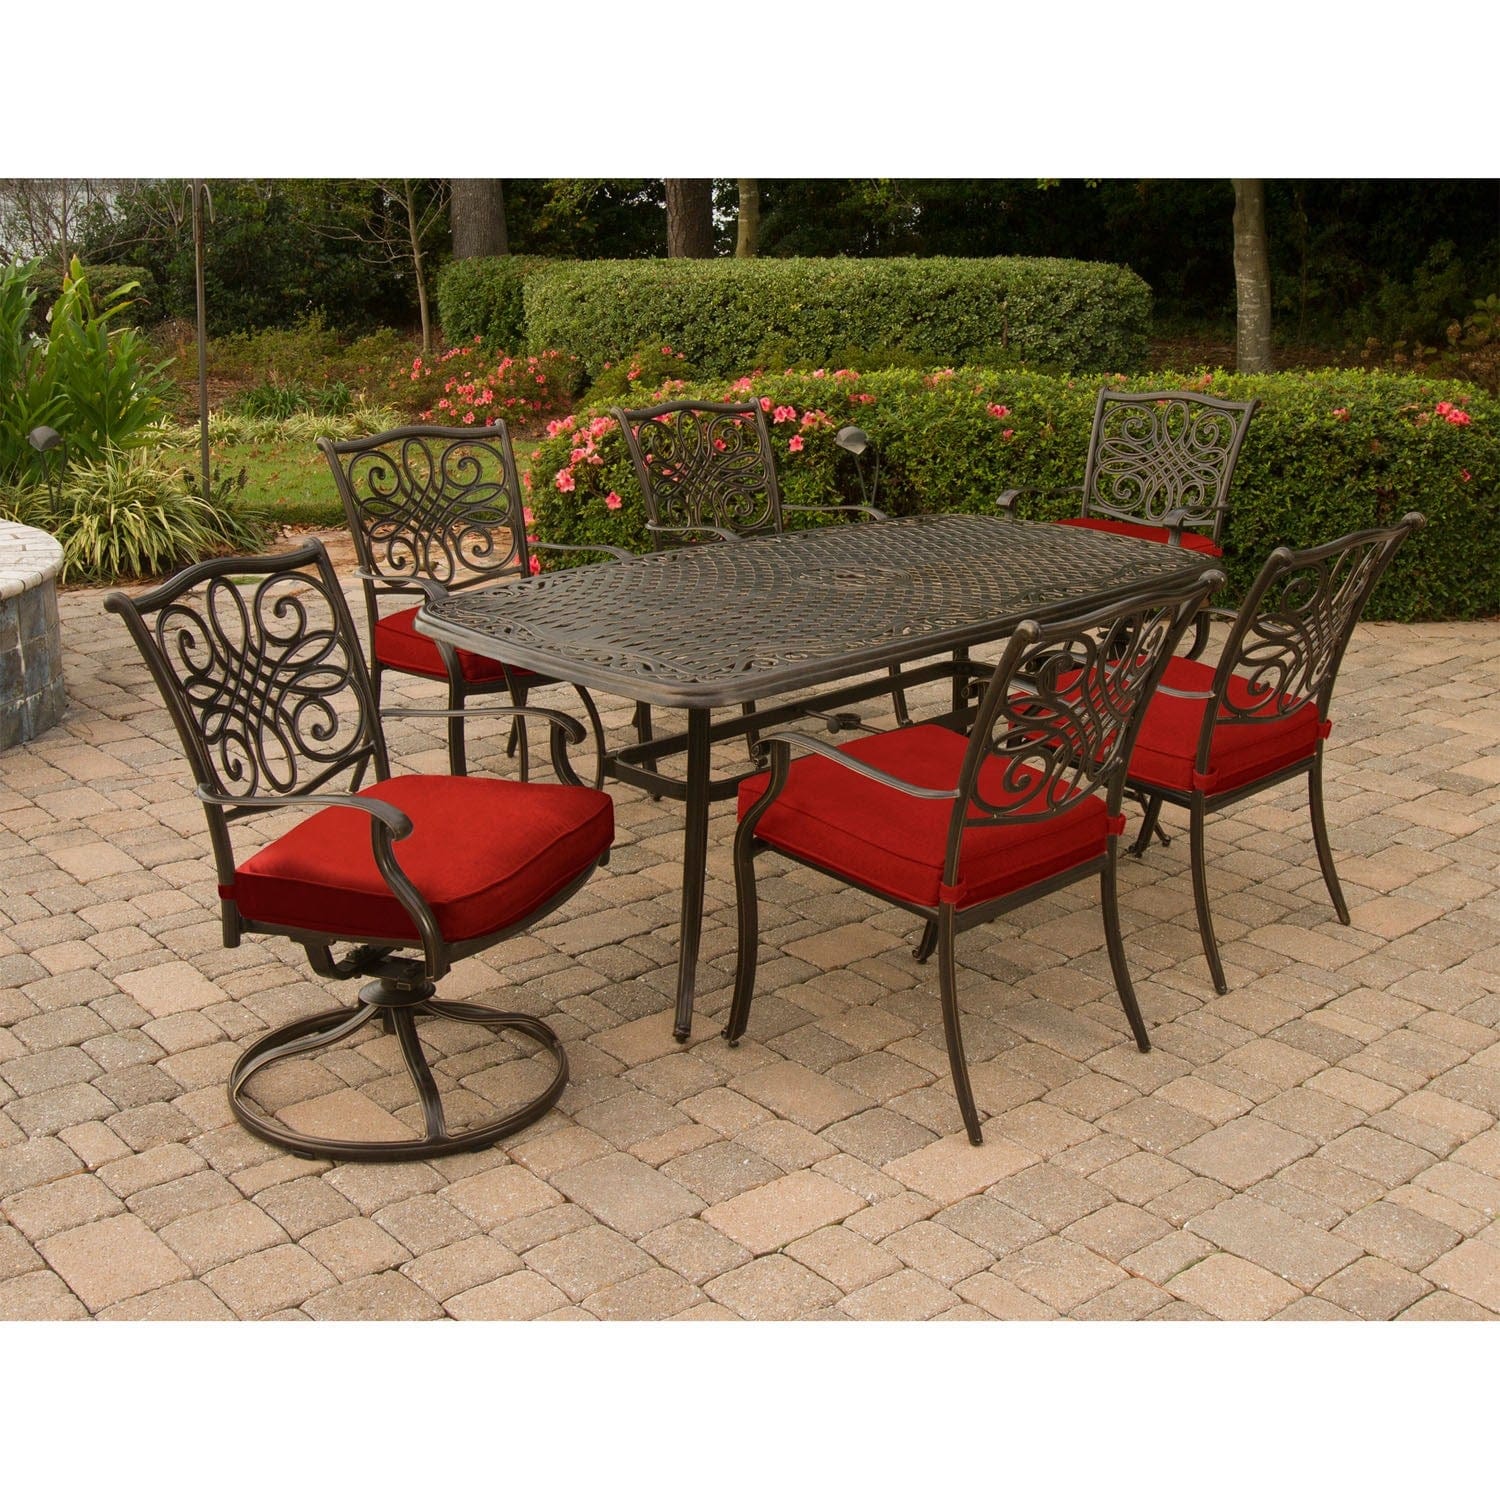 Hanover Outdoor Dining Set Hanover - Traditions 7-Piece Aluminium Frame Dining Set in Red with 72 x 38 in. Cast-top Table | TRADDN7PCSW6-RED